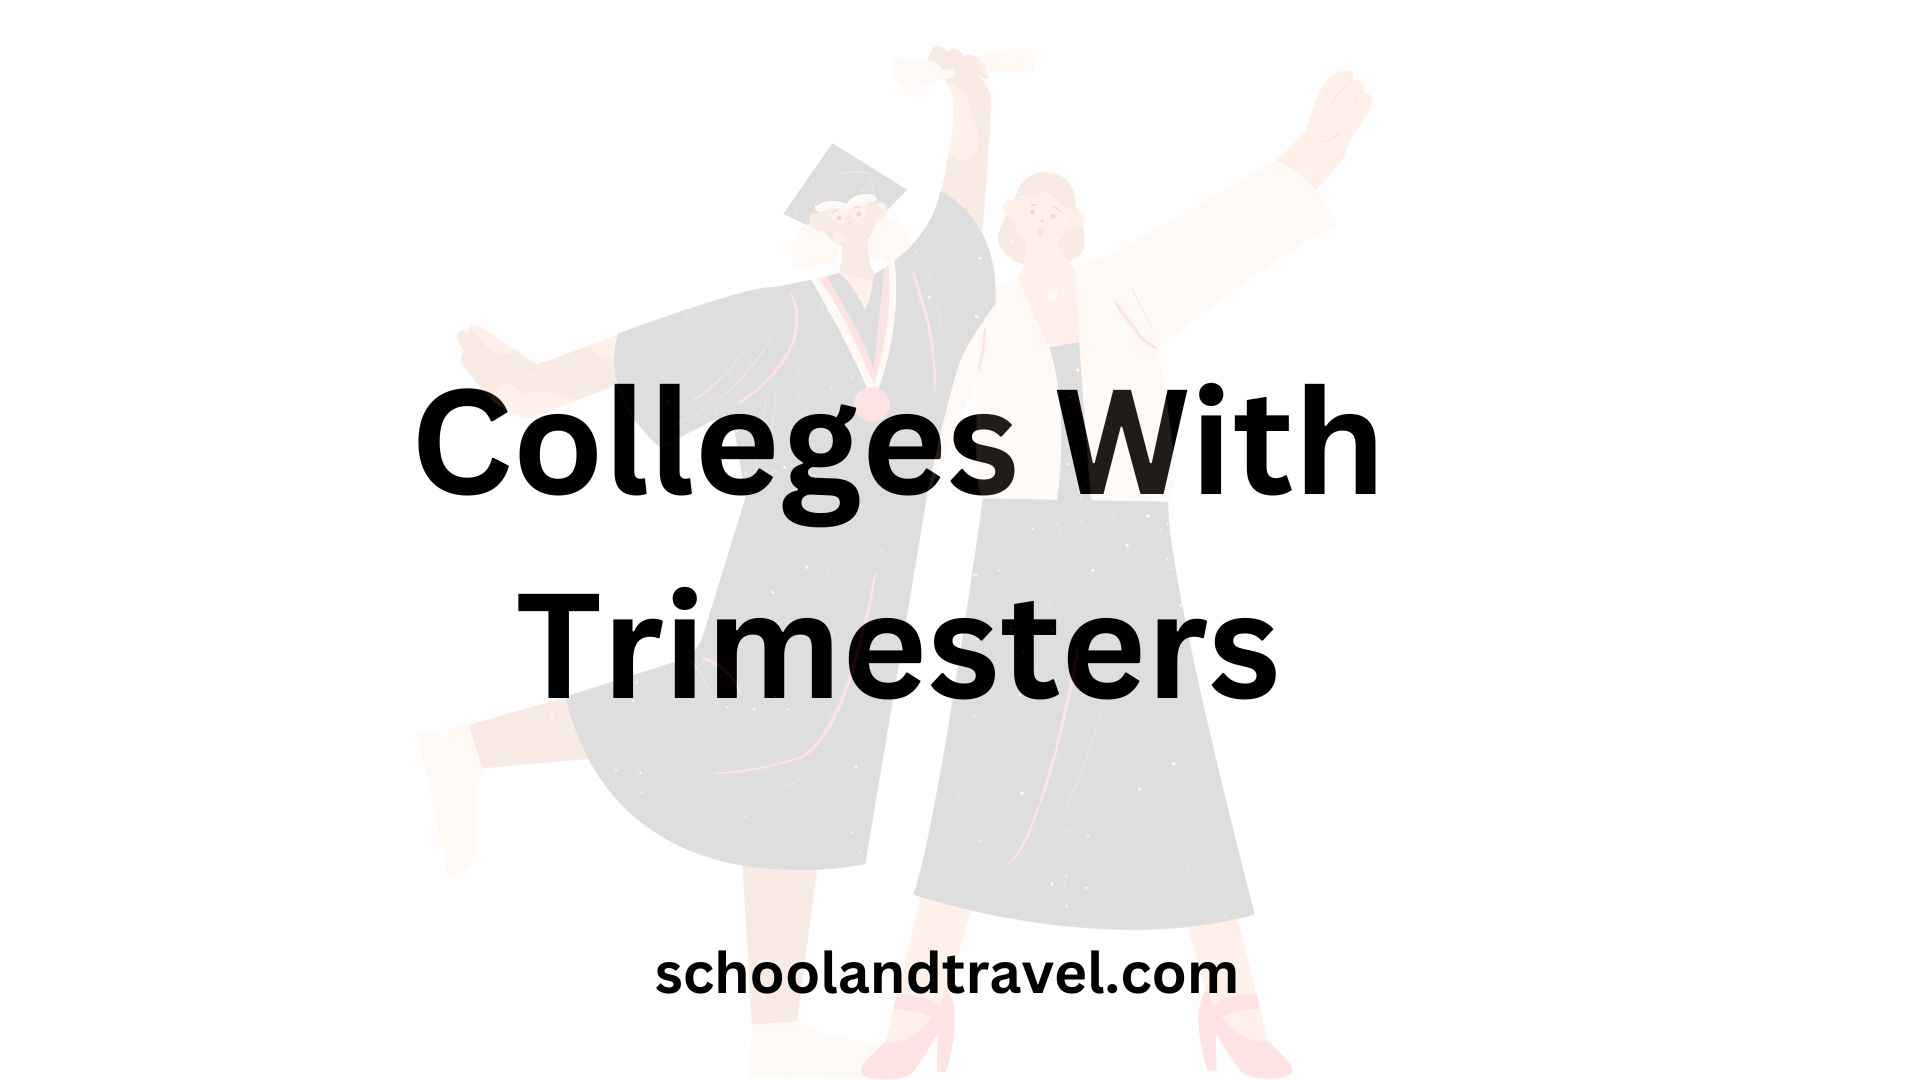 Colleges With Trimesters